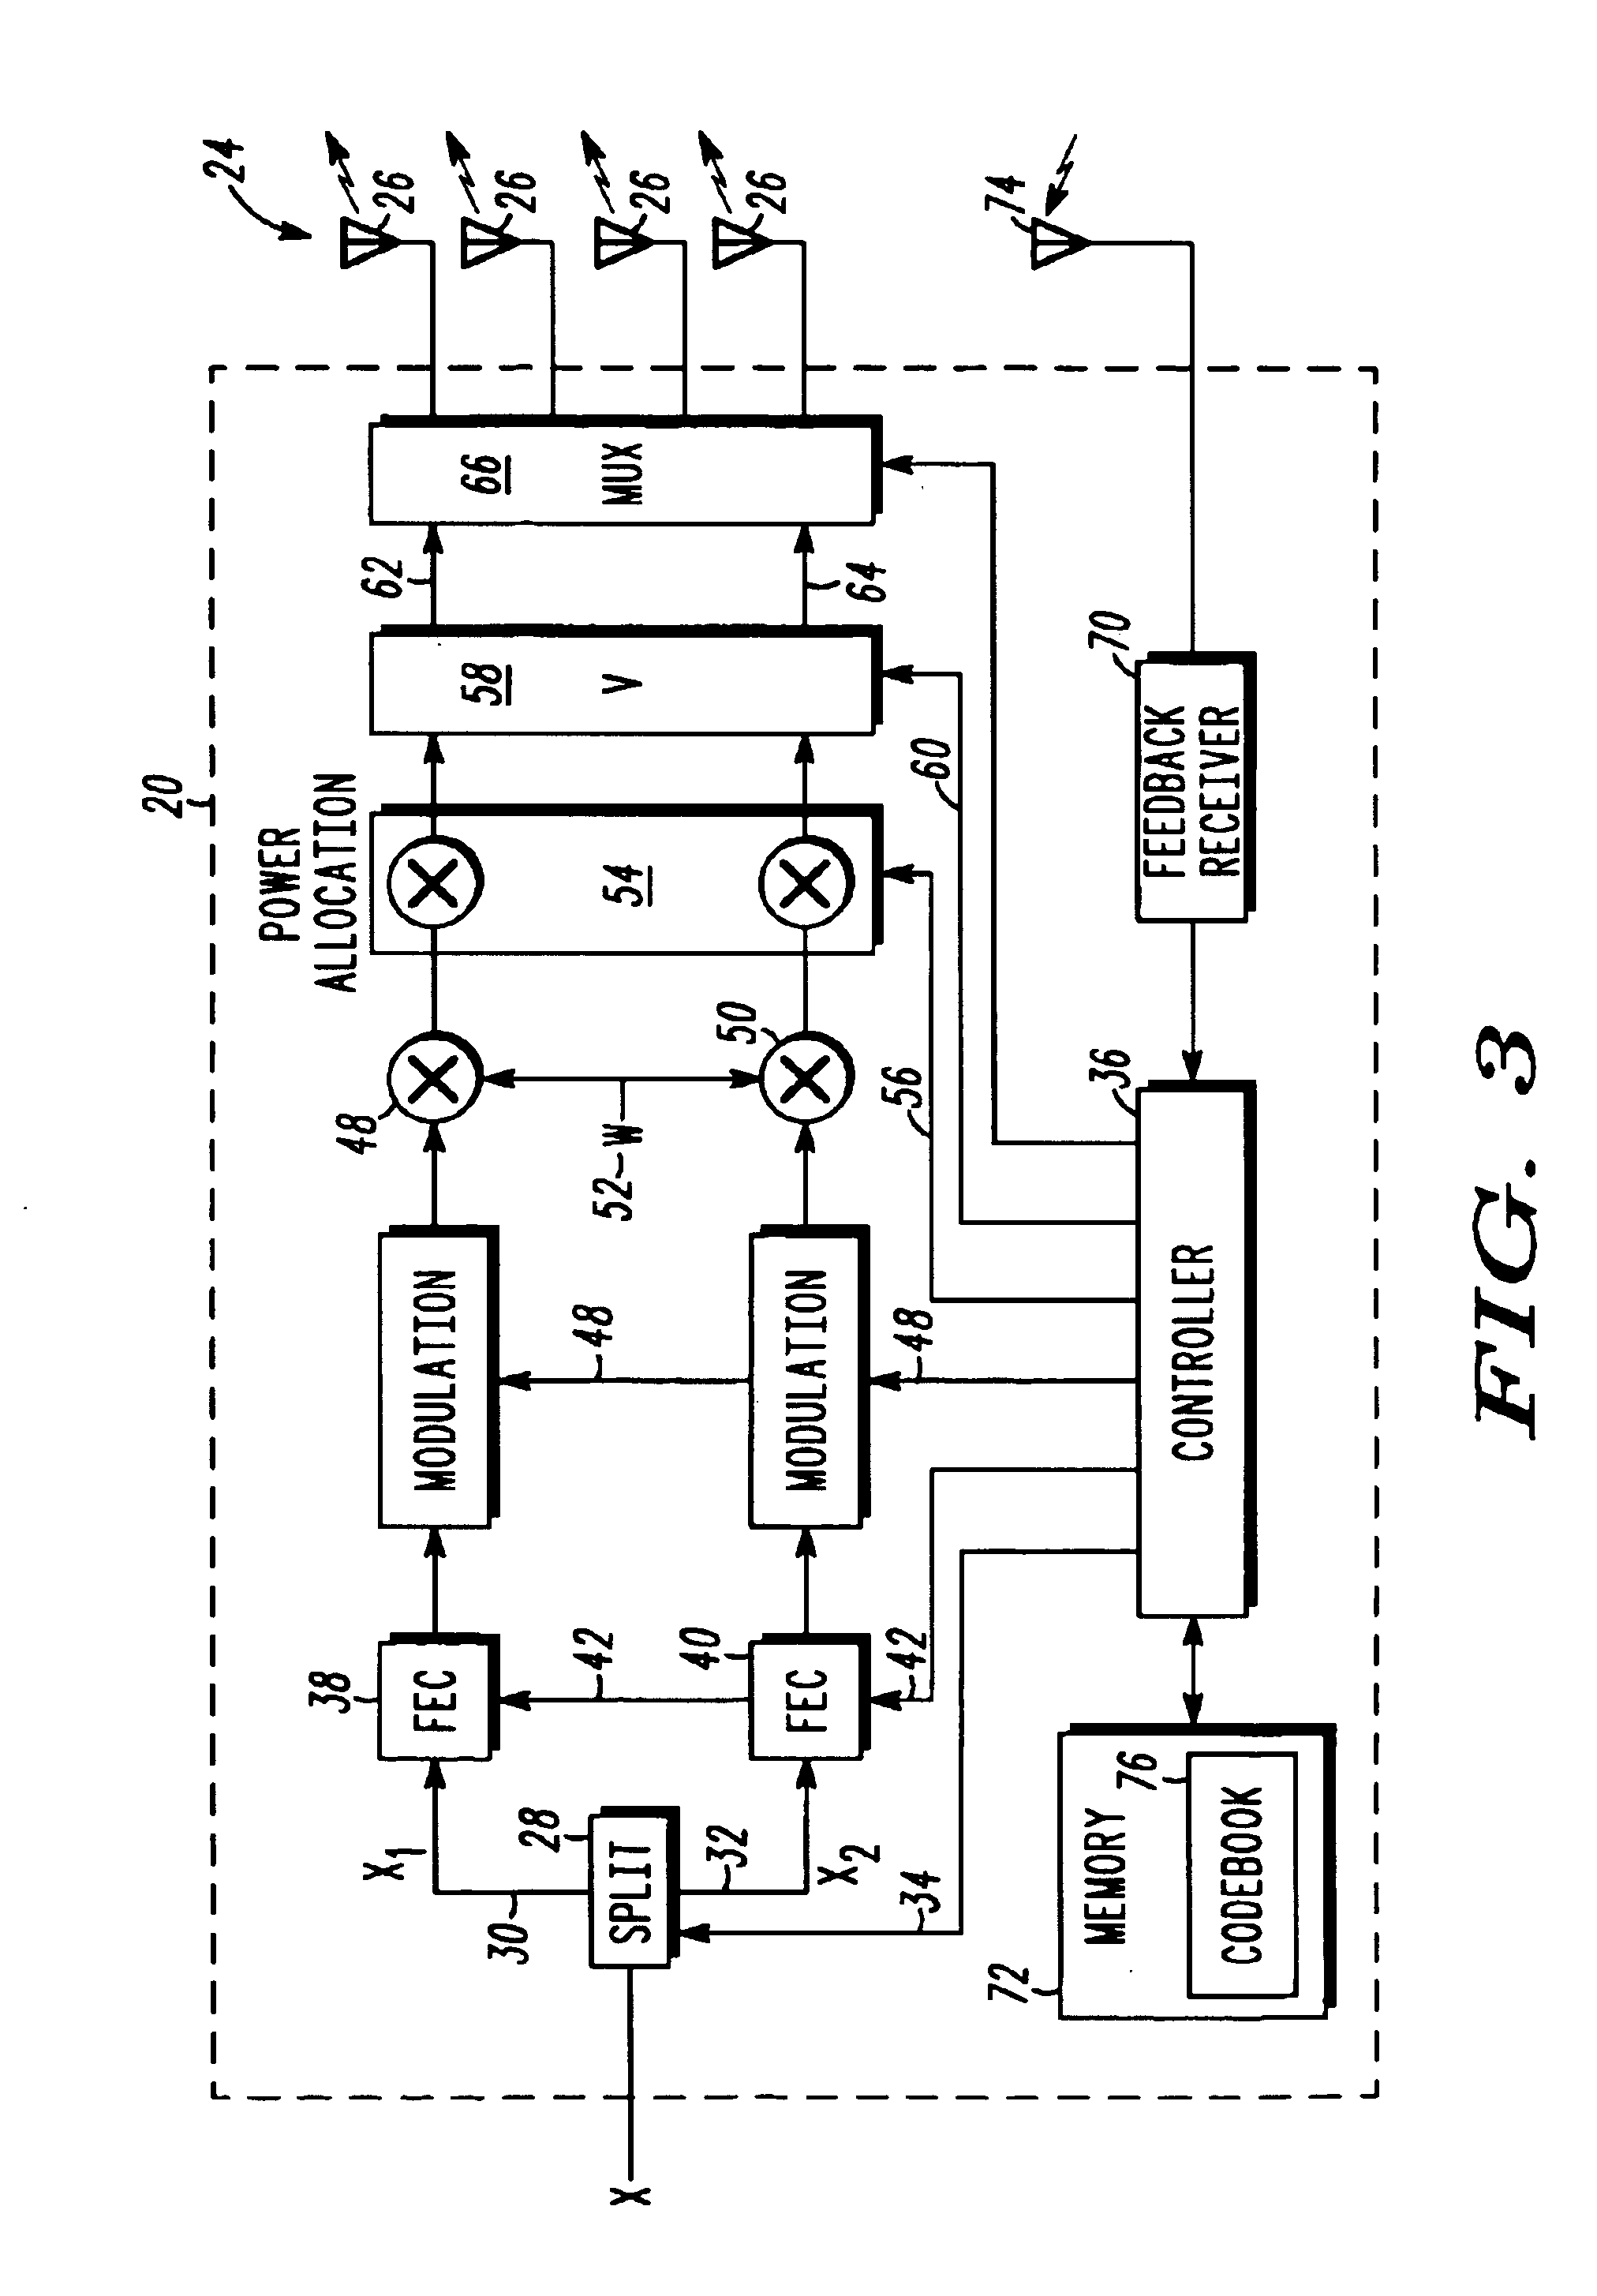 Method and system in a transceiver for controlling a multiple-input, multiple-output communications channel